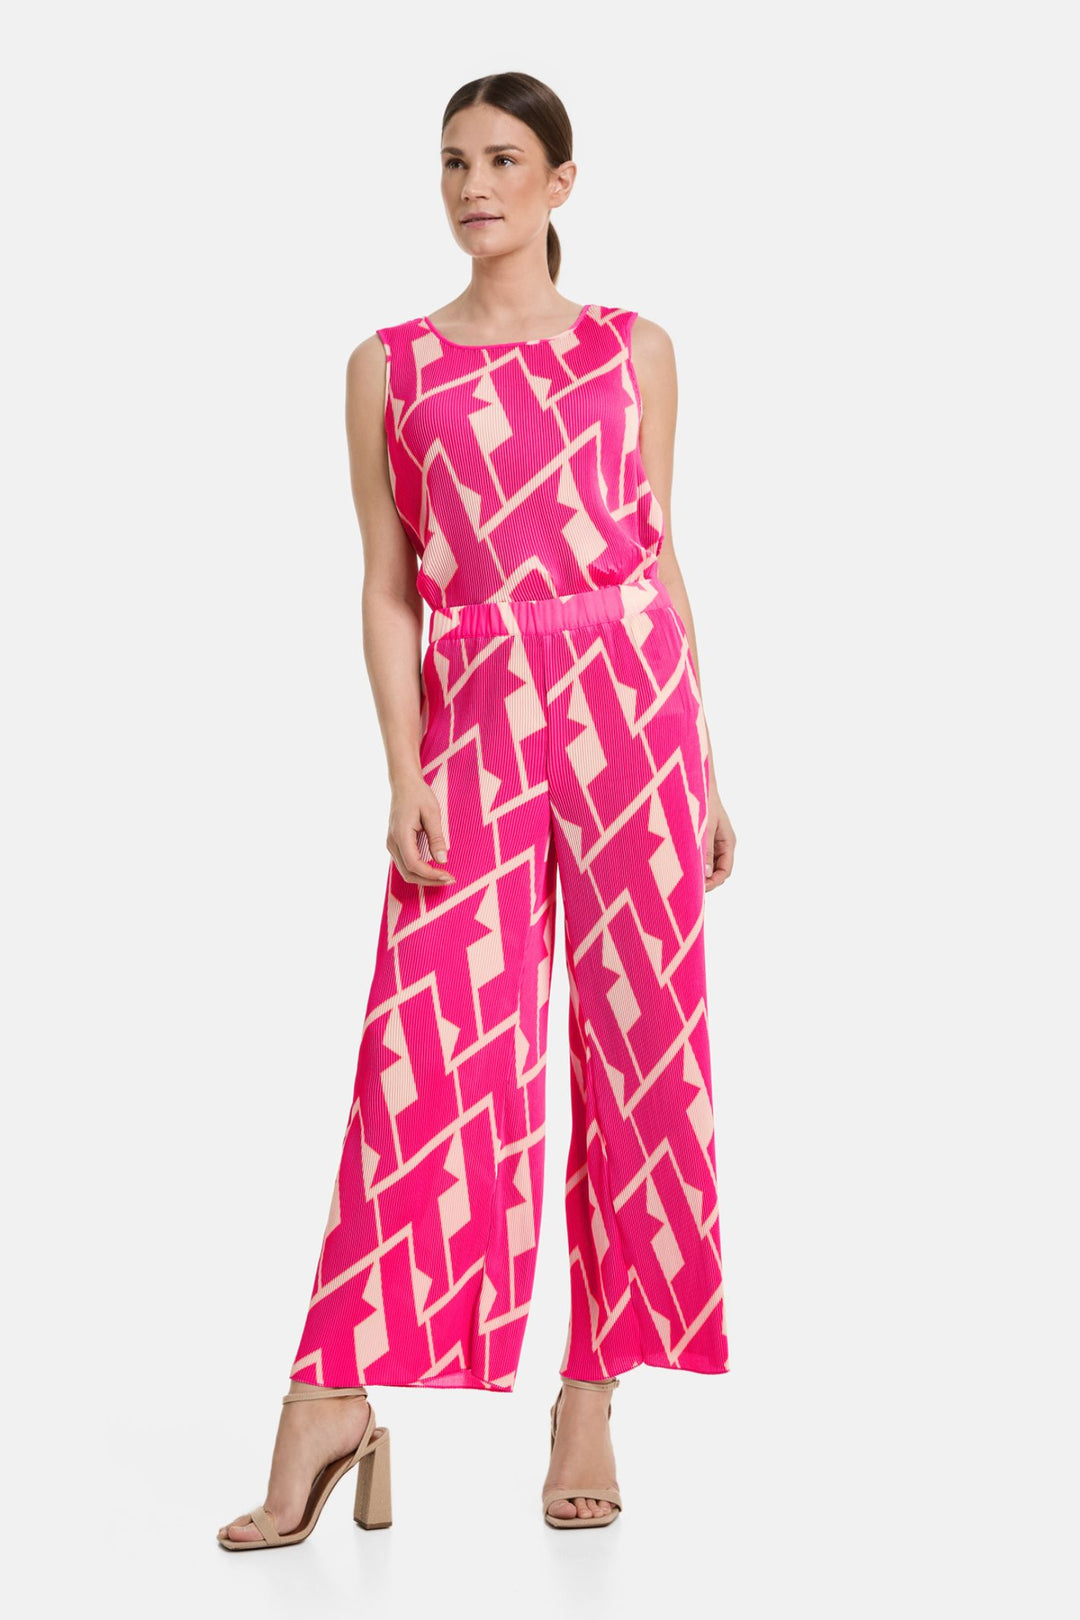 Gerry Weber 222116 Pink Geo Print Wide Leg Pleated Trousers